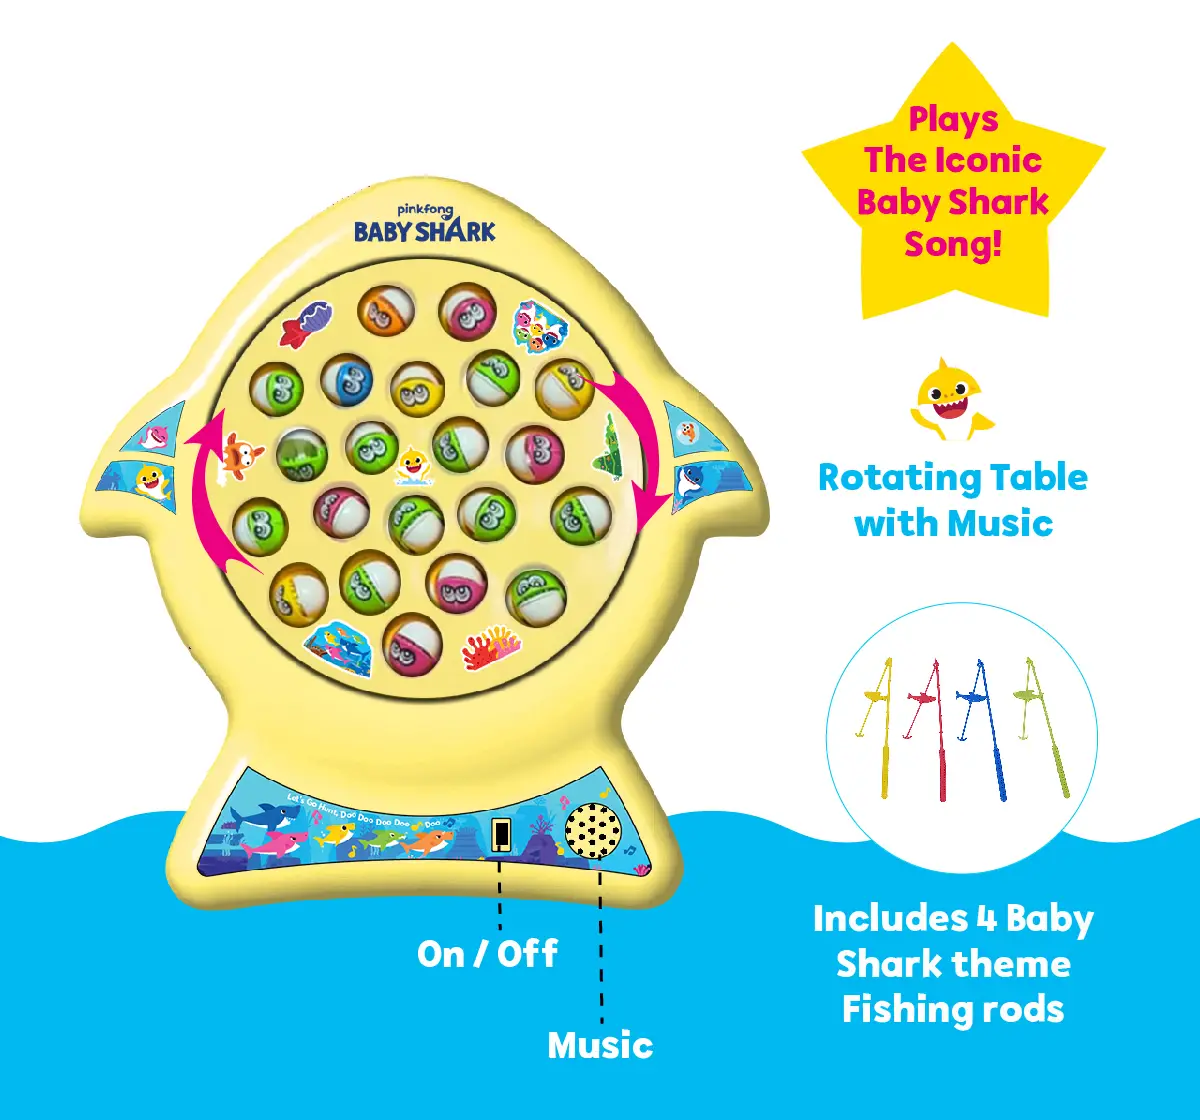 Li'l Wizards Baby Shark Sing and Go Fishing Game For Kids of Age 4Y+, Multicolour